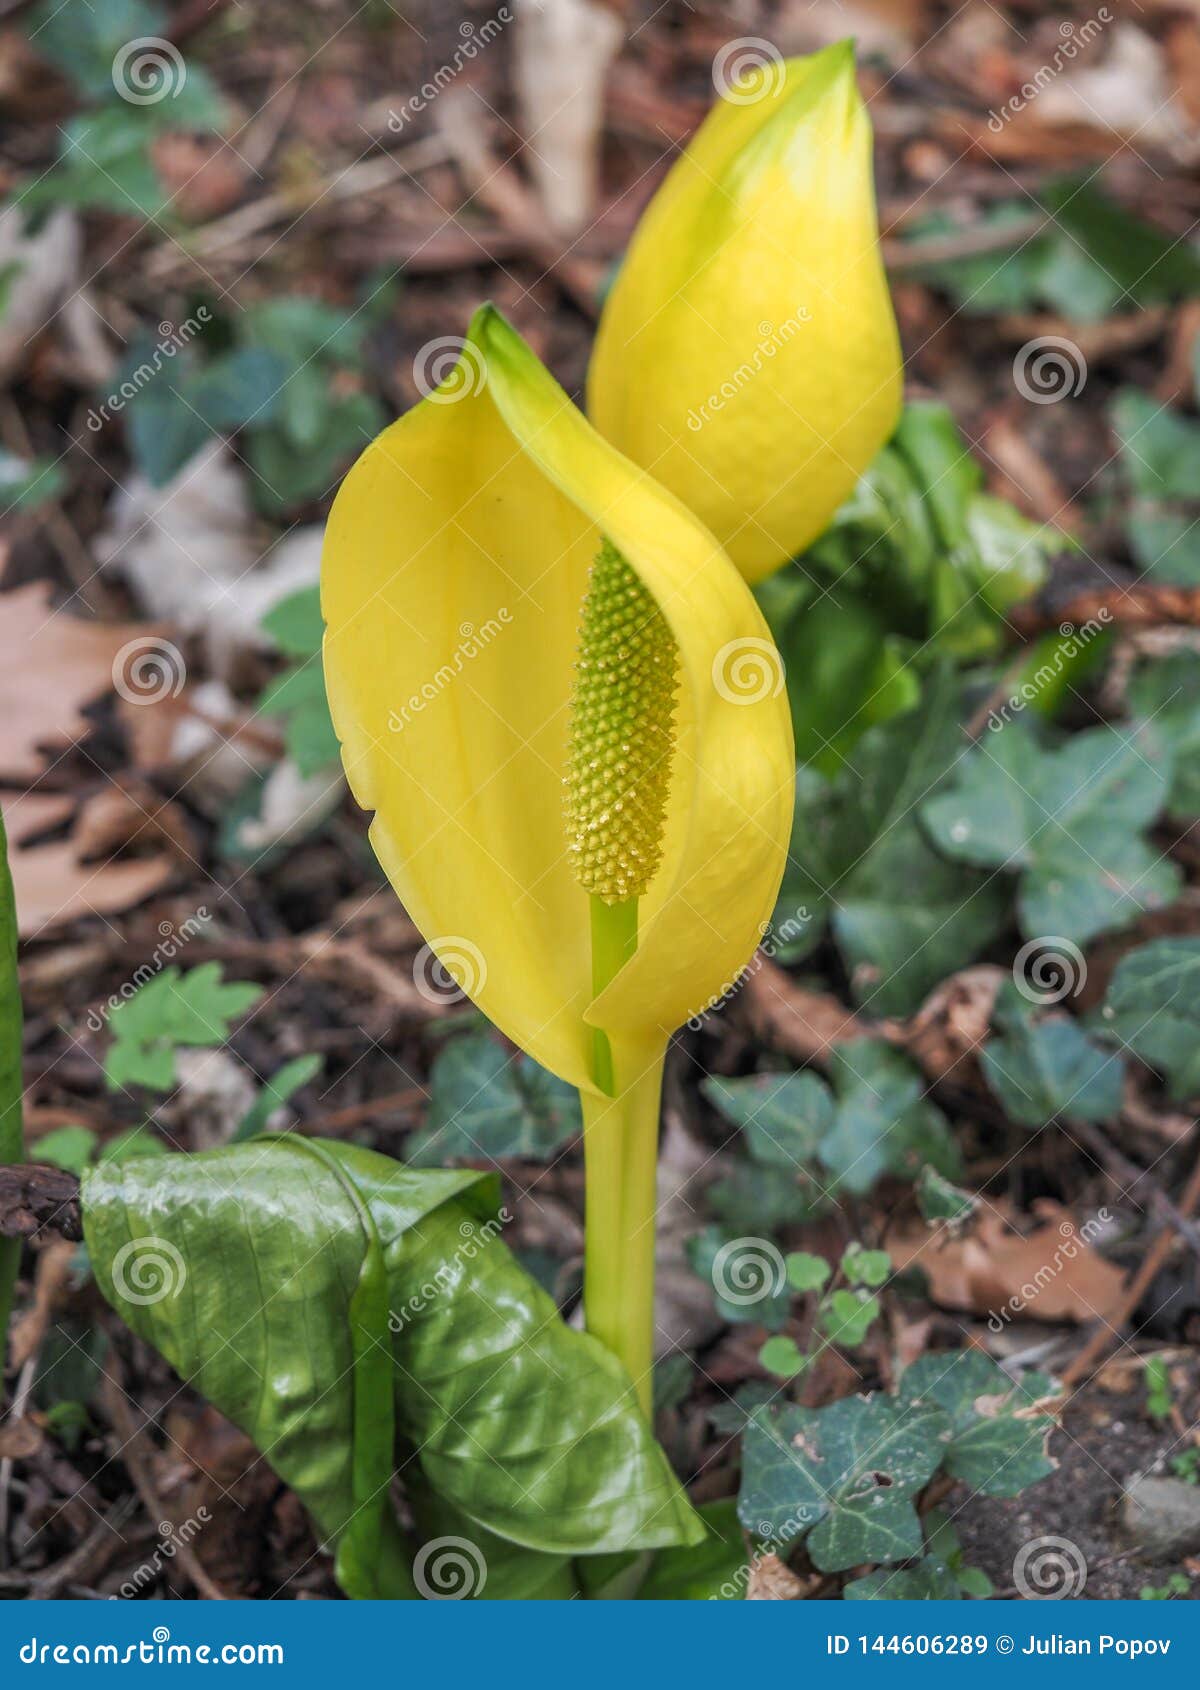 Lysichiton Americanus Growing Plant In The Swamp Western Skunk Cabbage Stock Image Image Of England Green 144606289